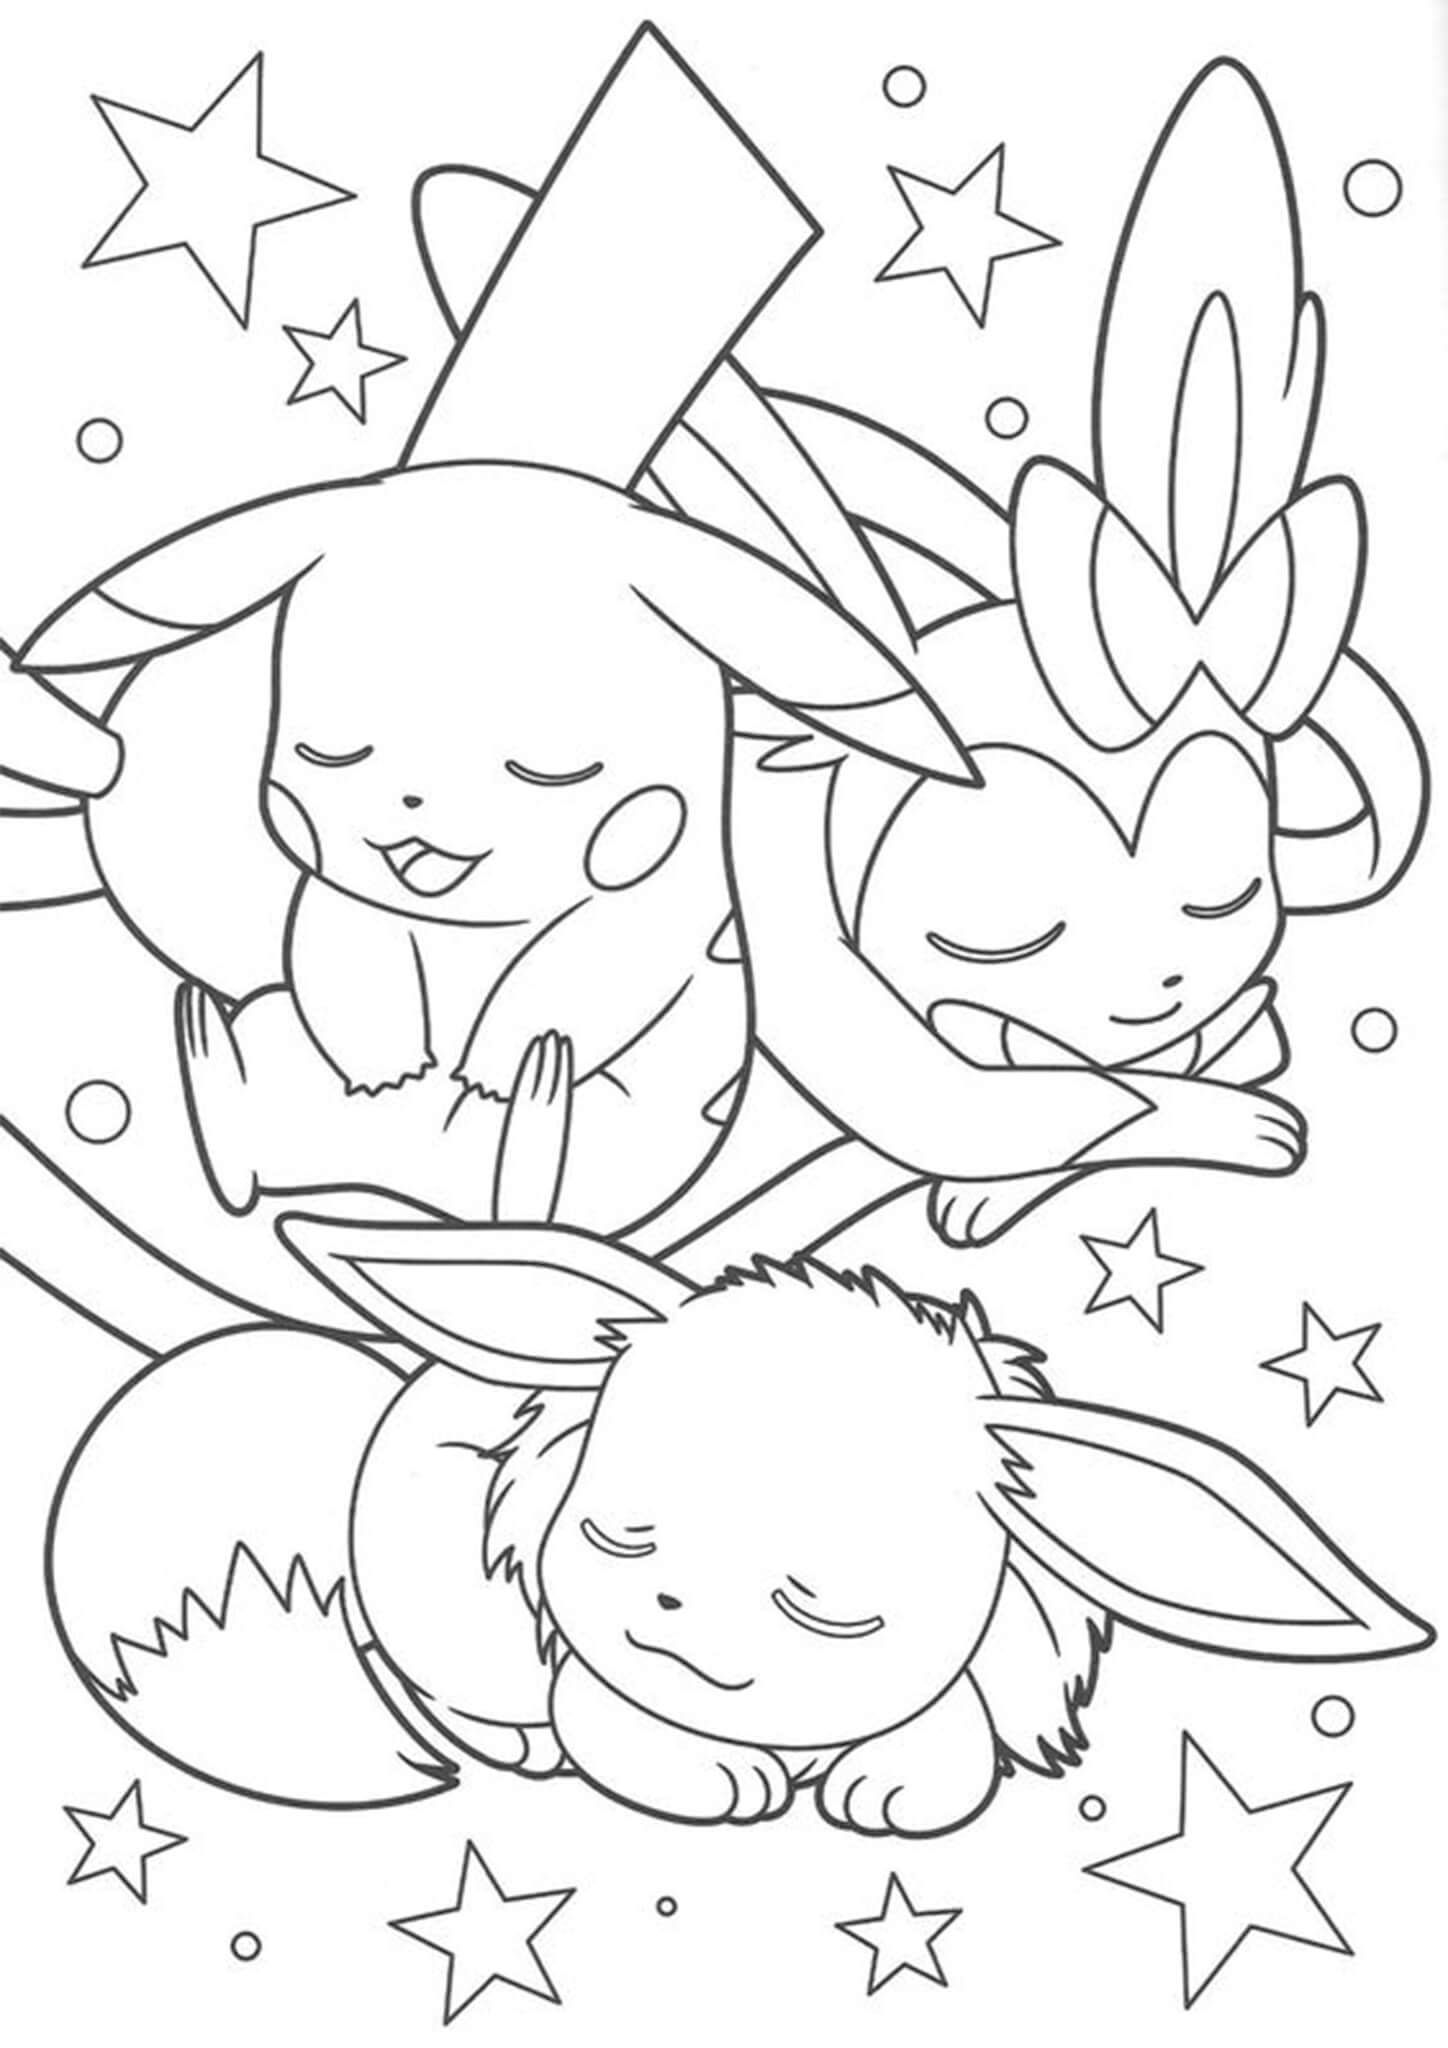 Free & Easy To Print Eevee Coloring Pages | Pokemon coloring sheets,  Pokemon coloring pages, Pikachu coloring page